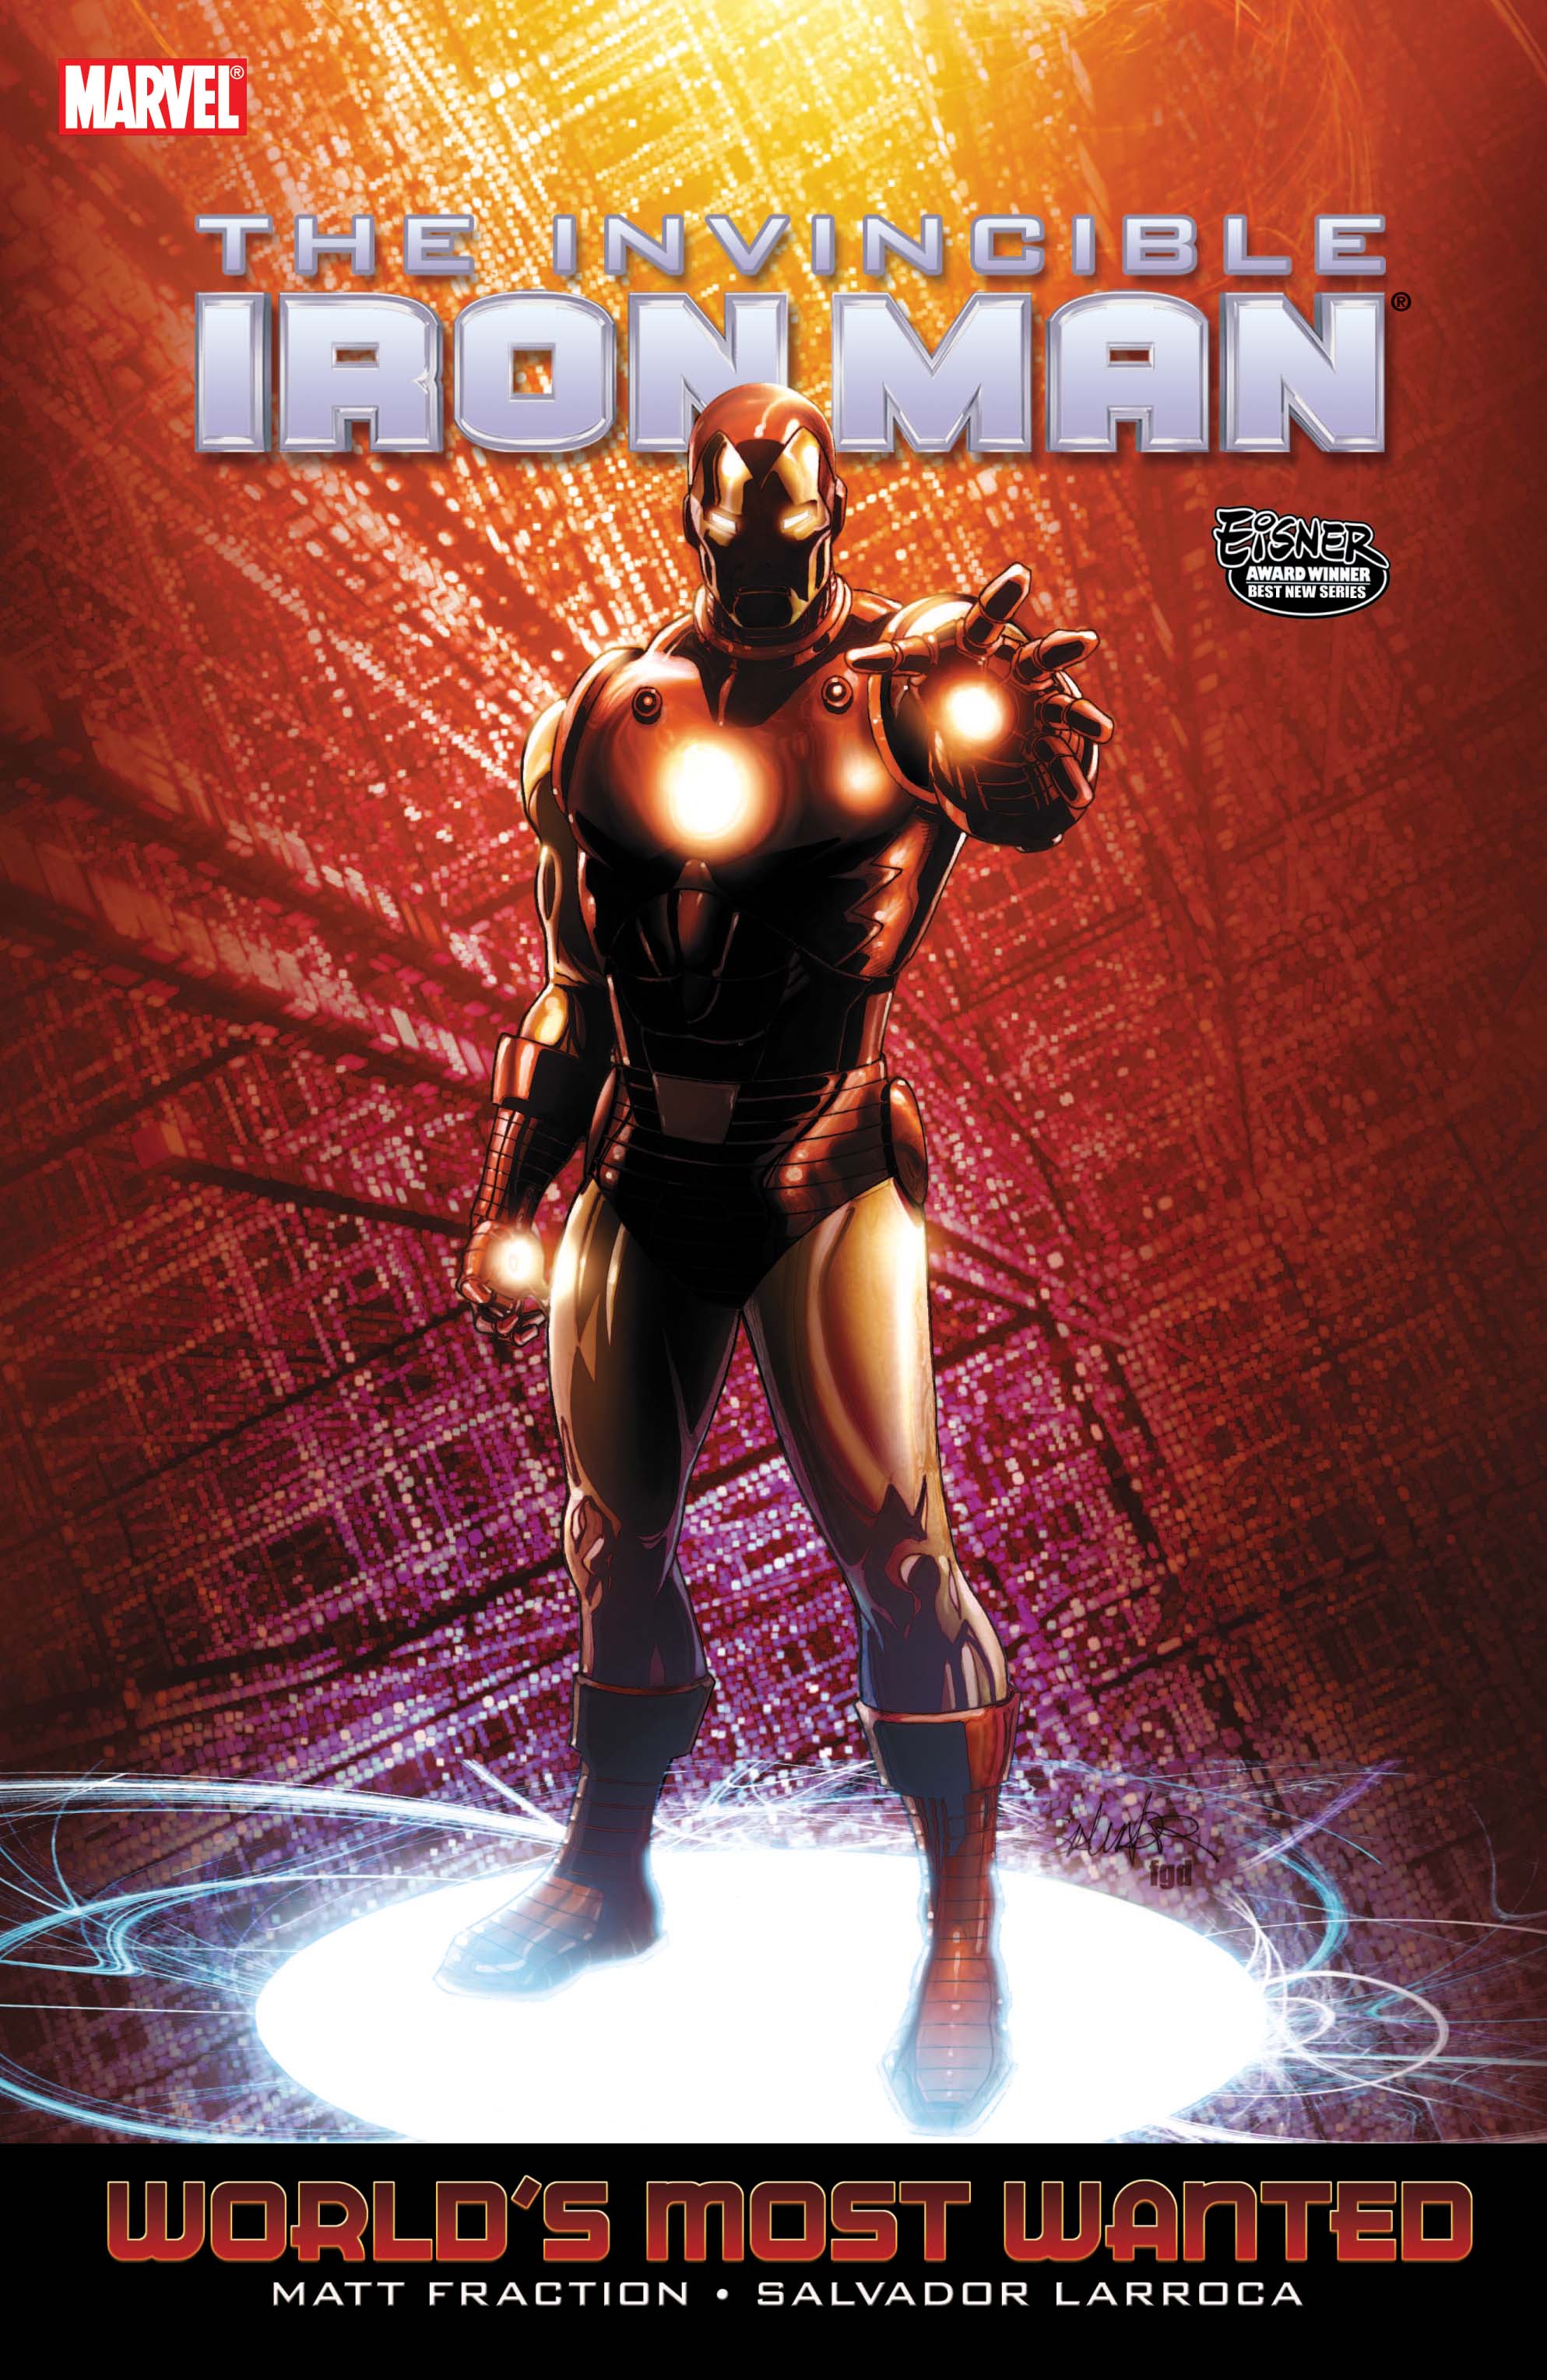 Invincible Iron Man Vol. 3: Worlds Most Wanted Book 2 (Trade Paperback)